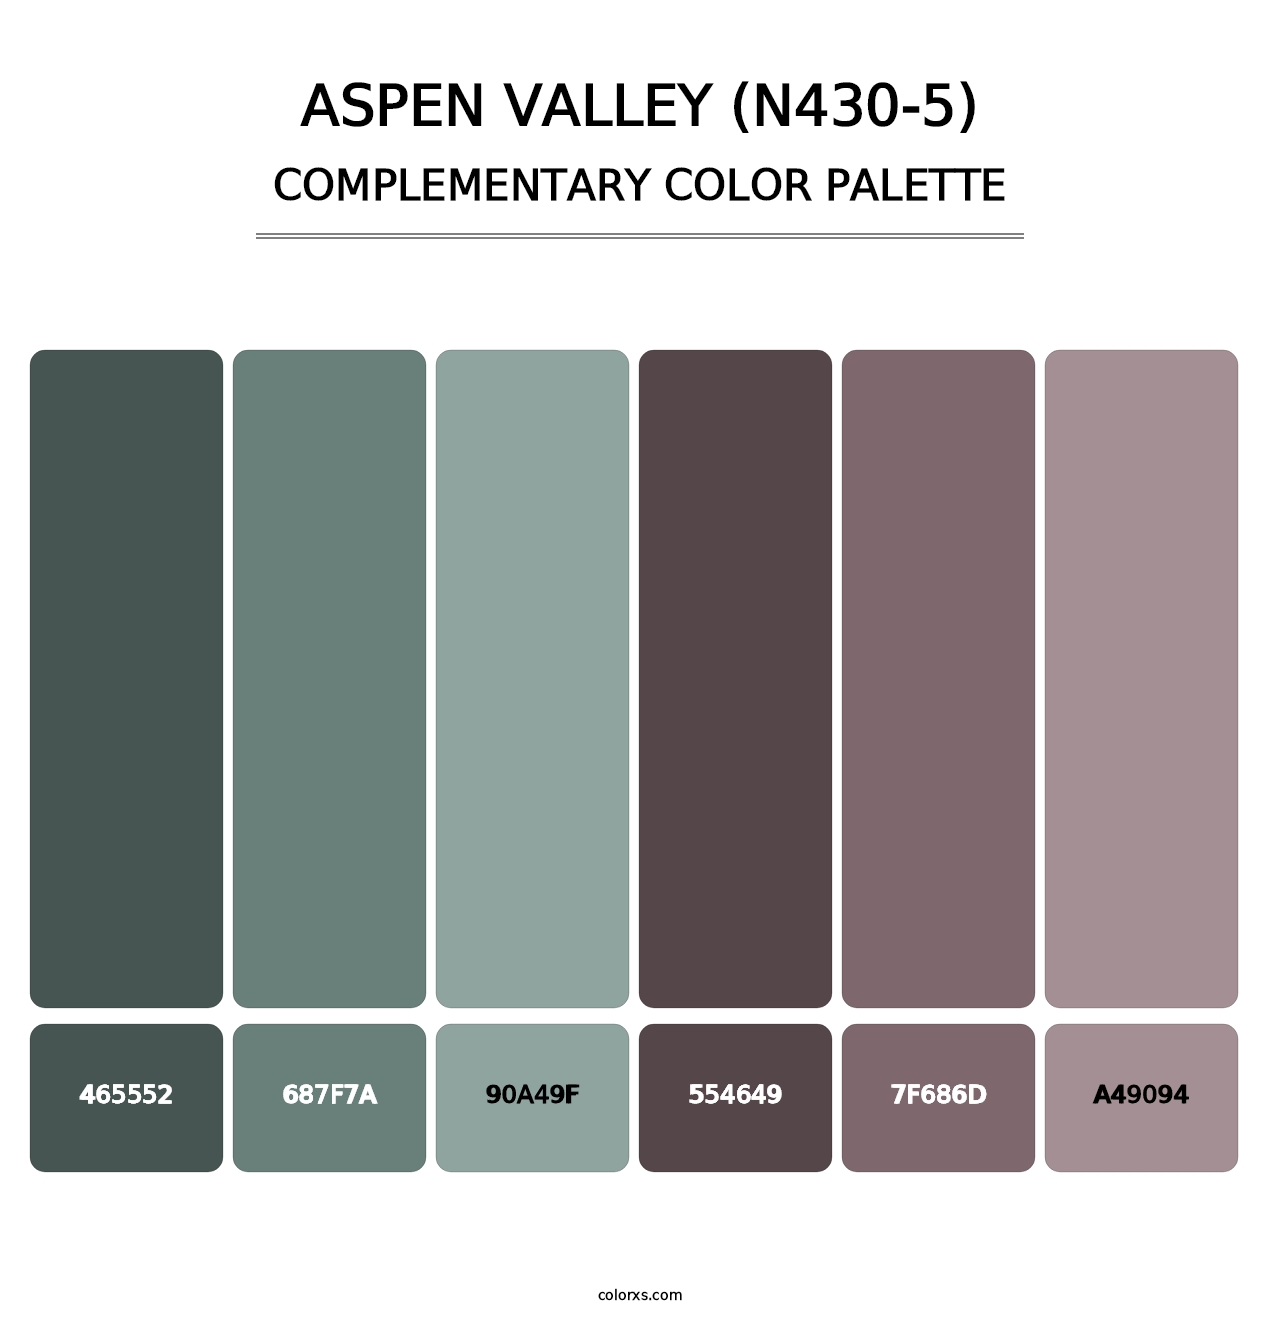 Aspen Valley (N430-5) - Complementary Color Palette